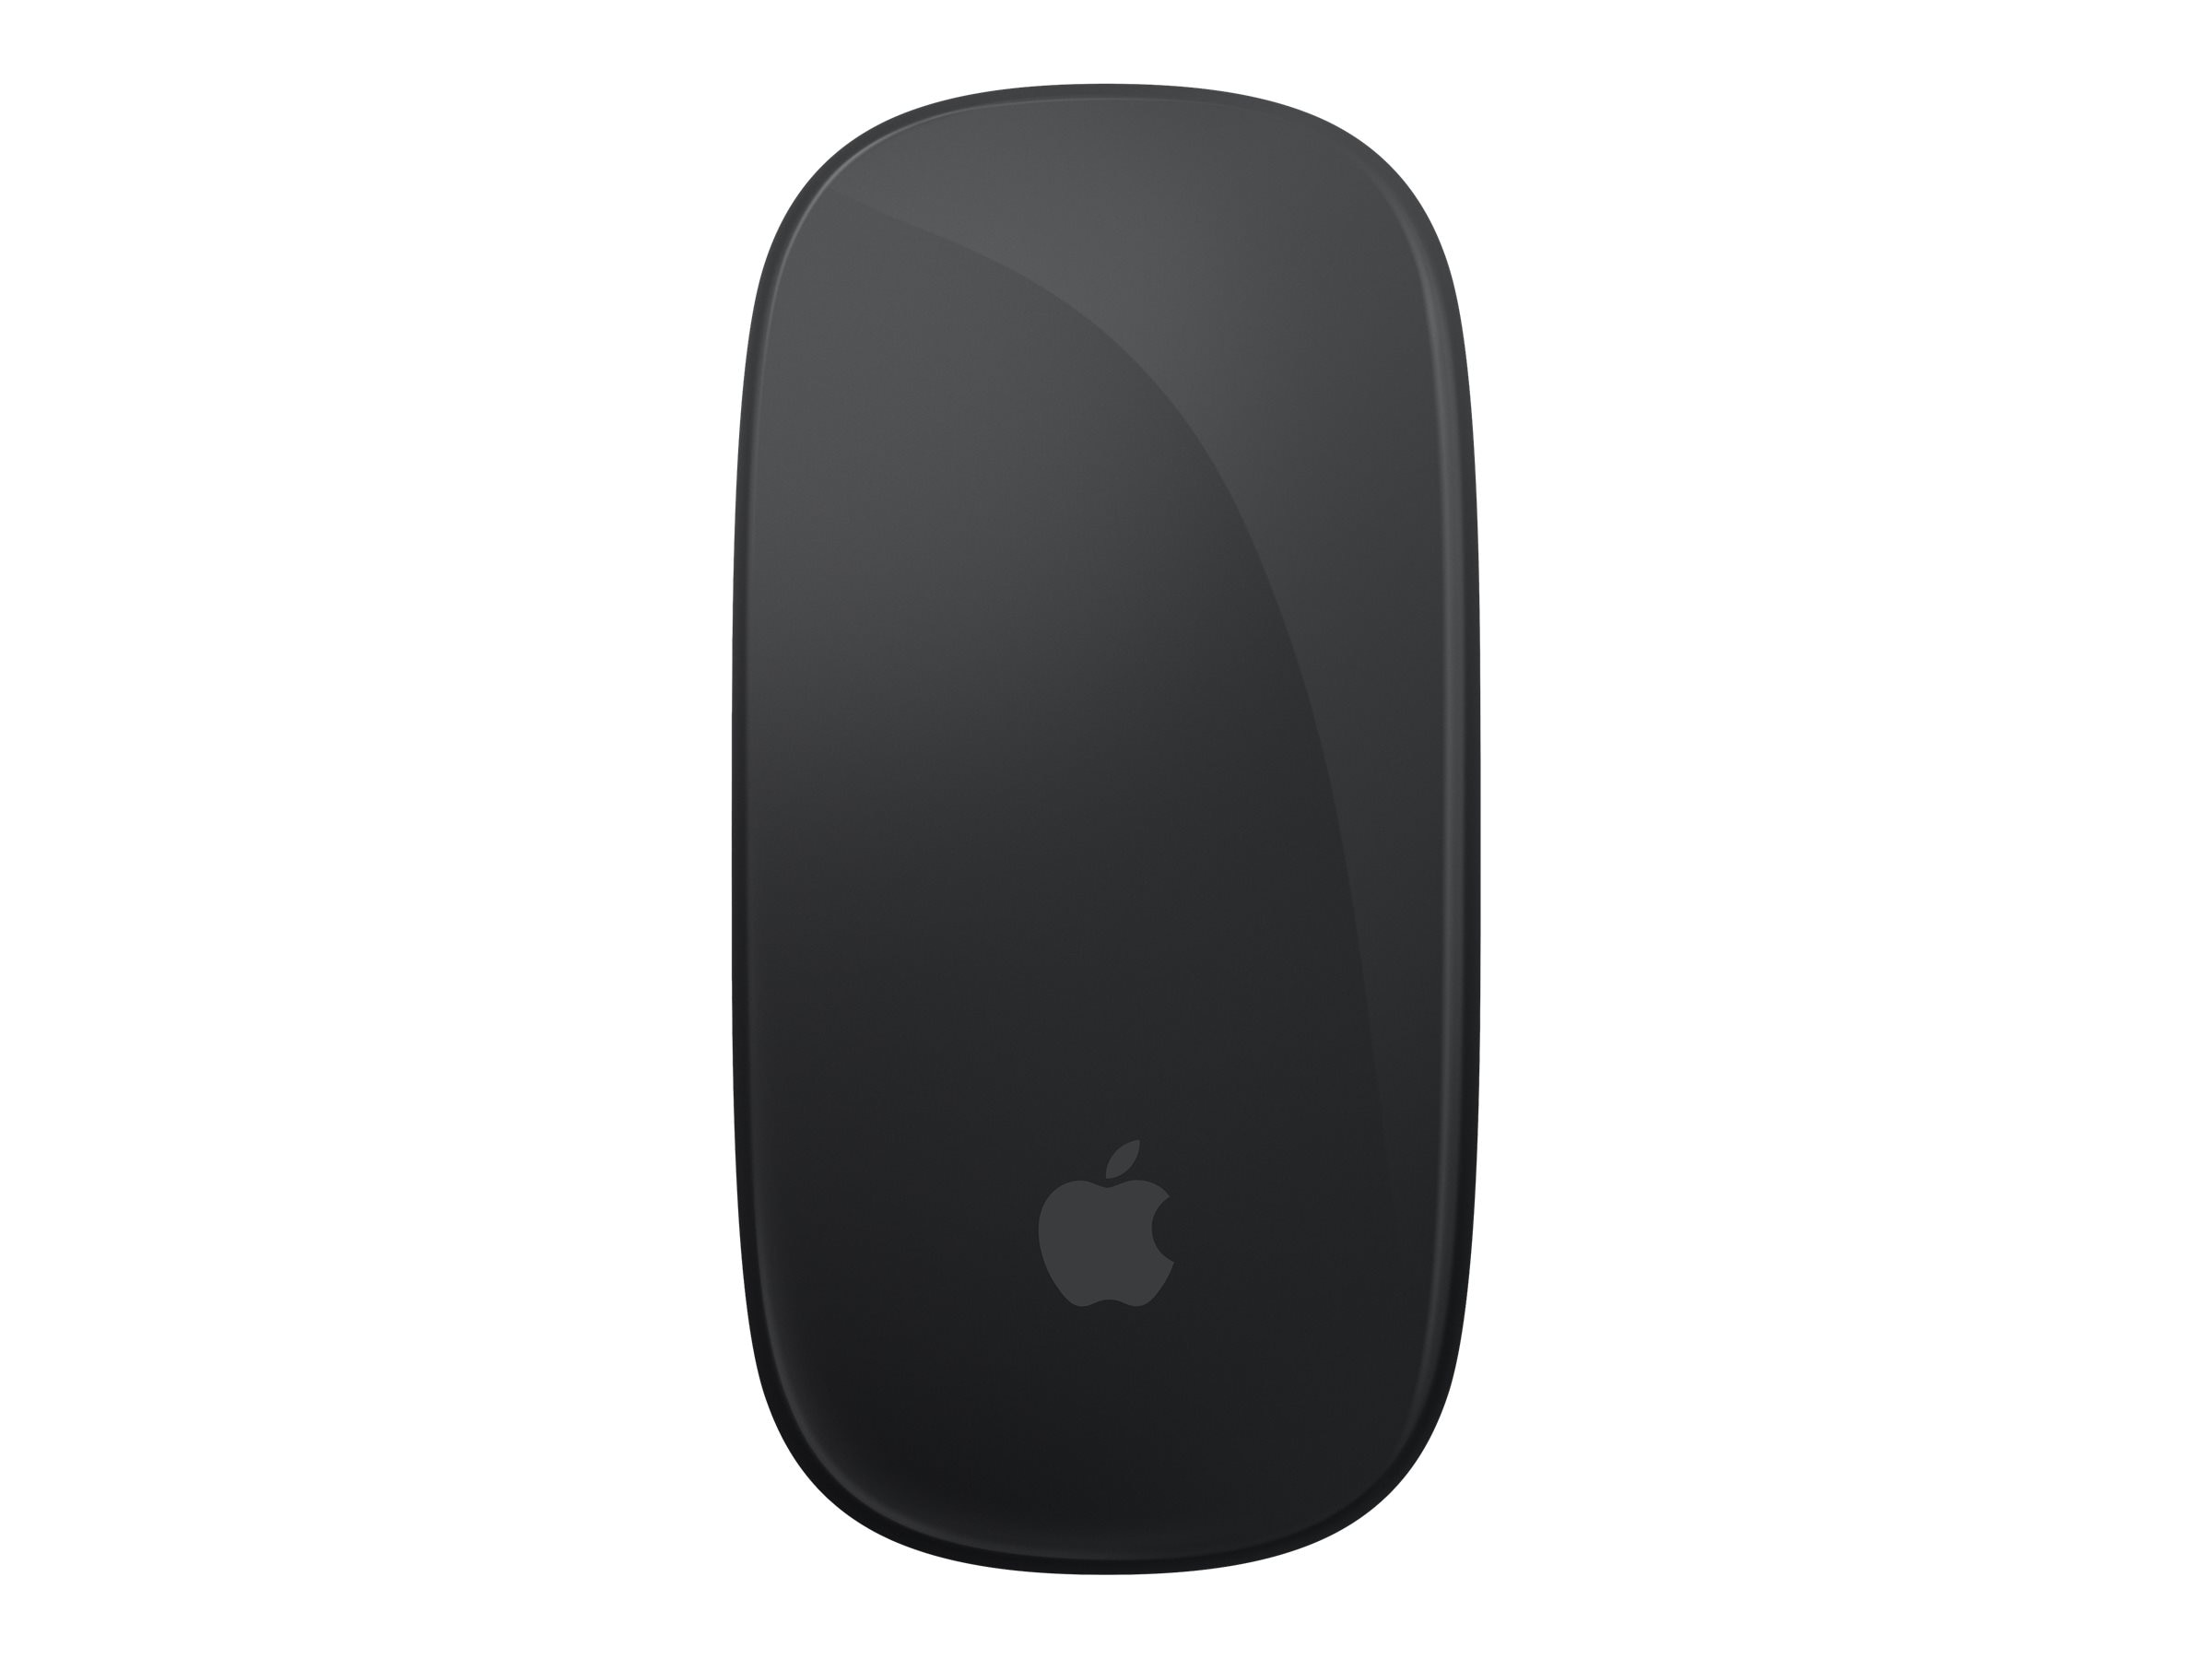 MMMQ3AM/A - Apple Magic Mouse Black Multi-Touch Surface